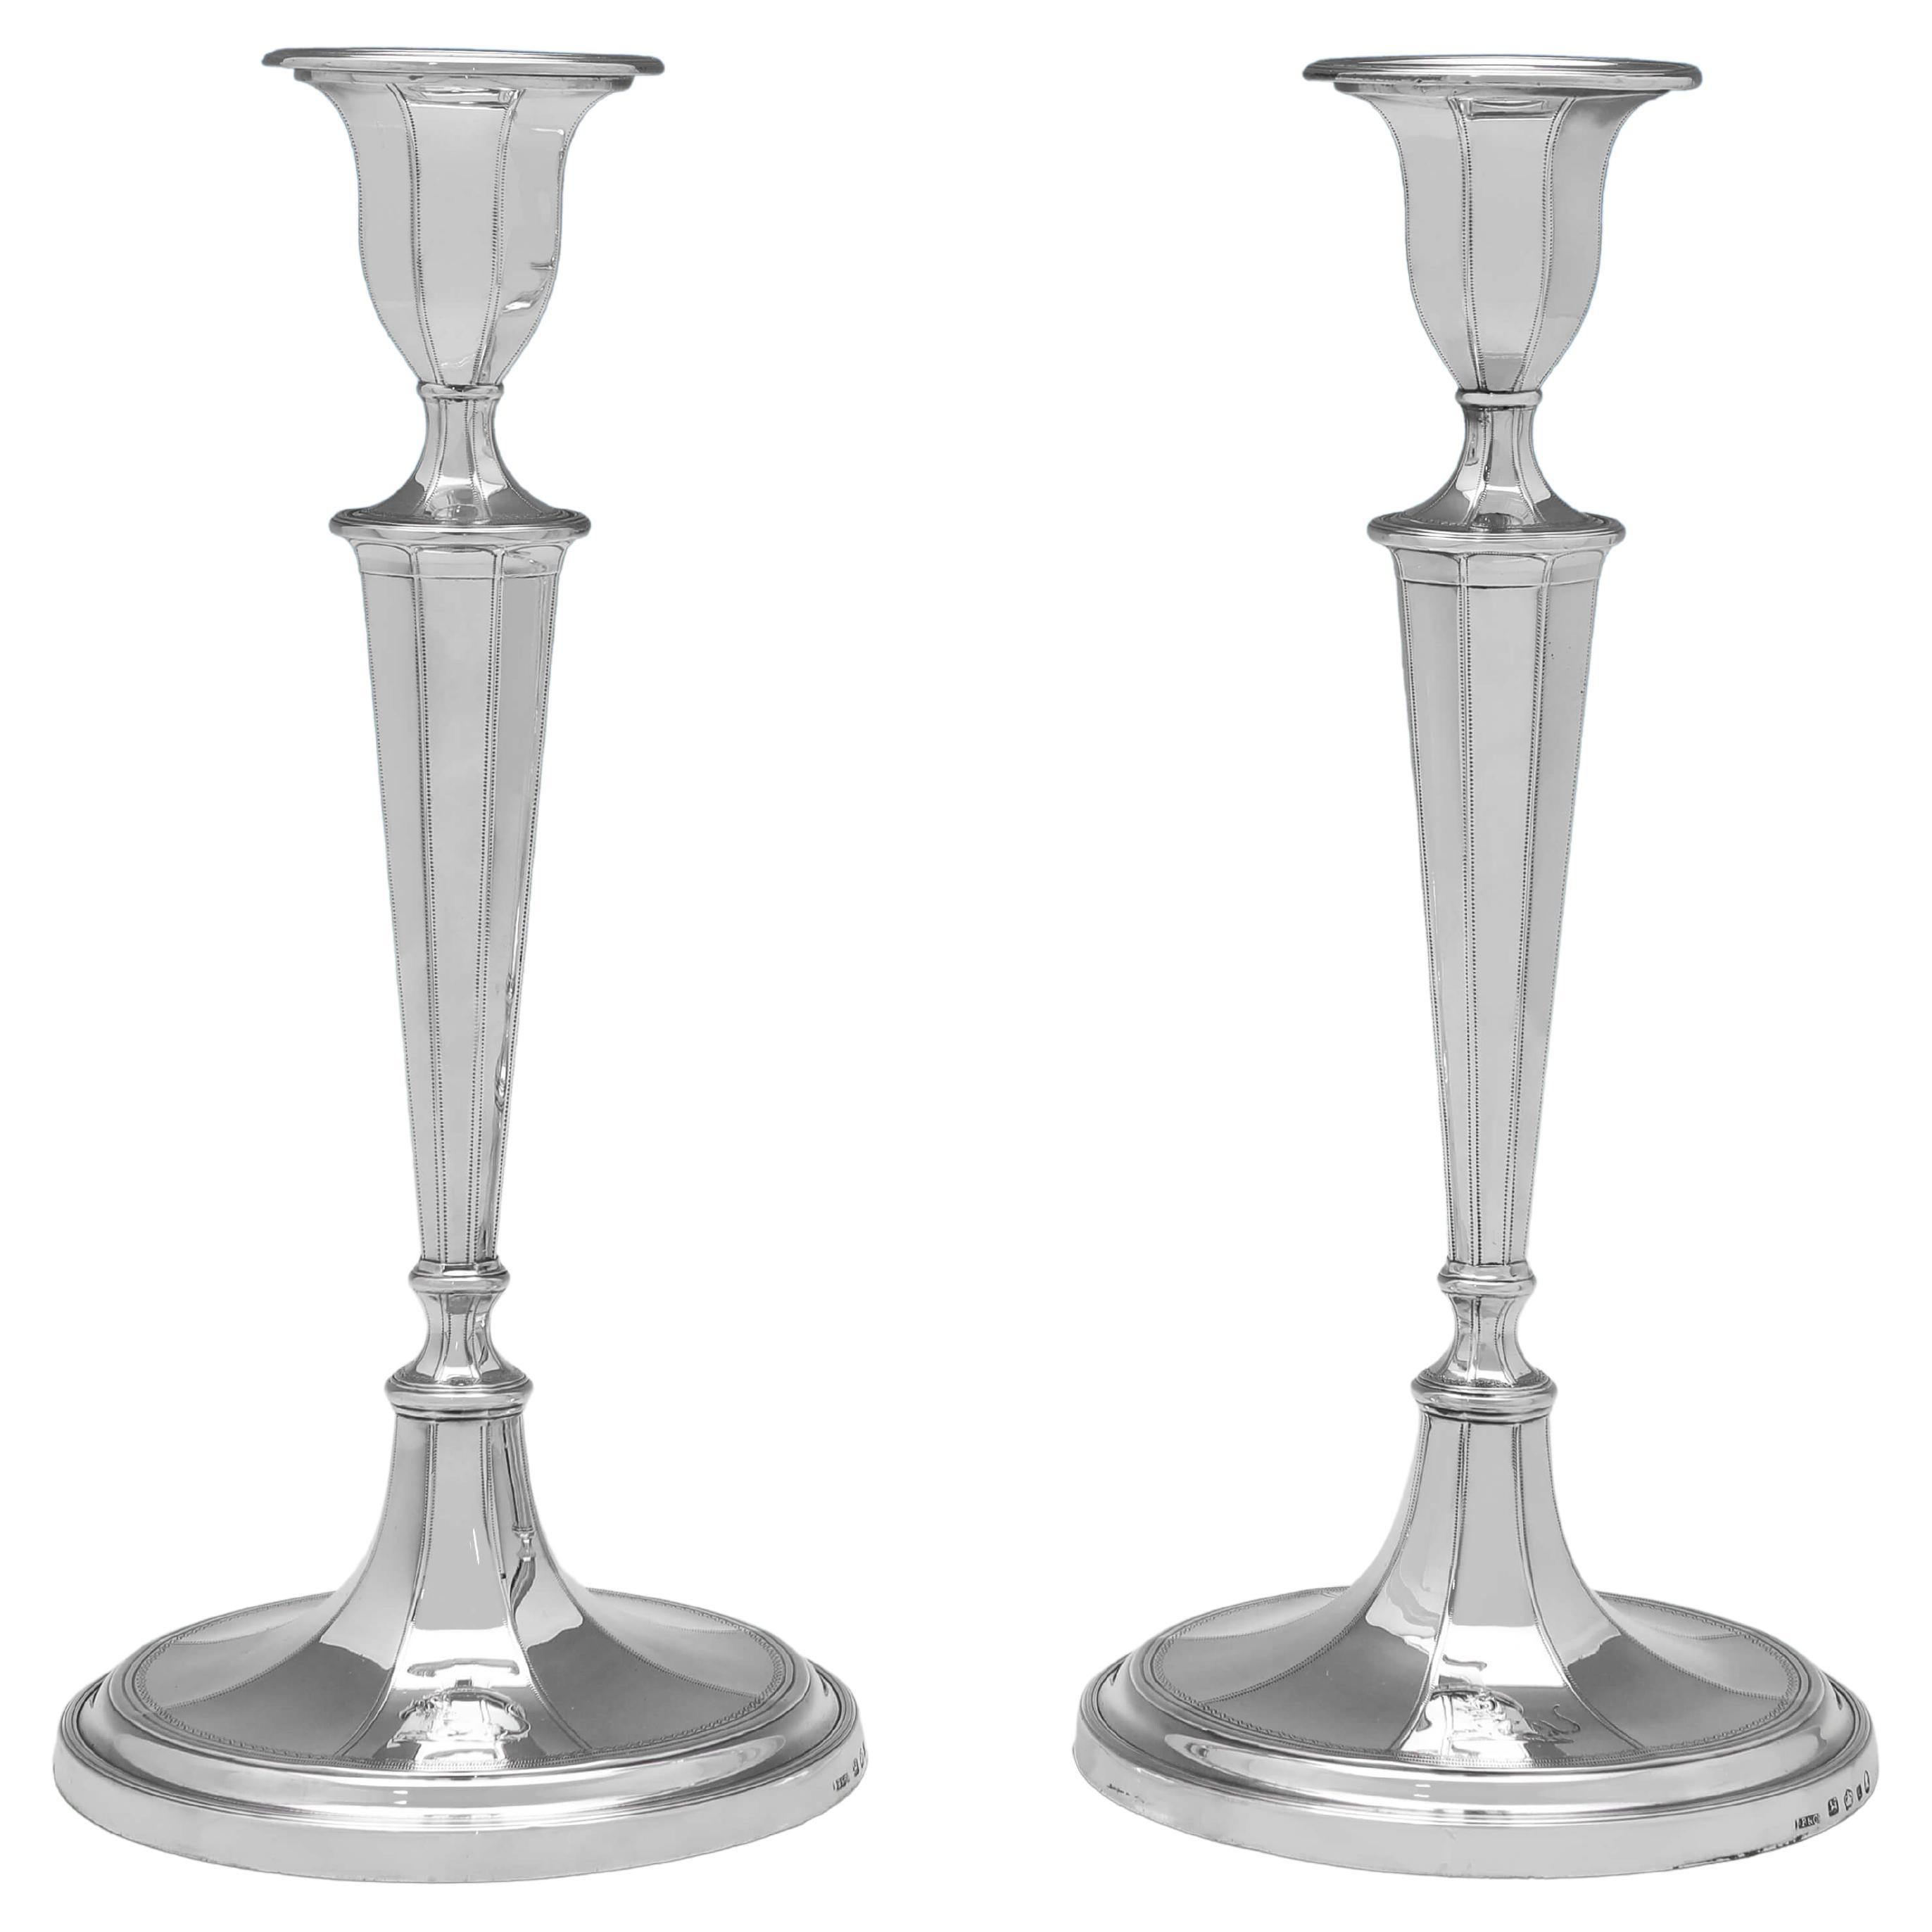 Neoclassical George III Period Pair of Candlesticks - Hallmarked in 1790 For Sale